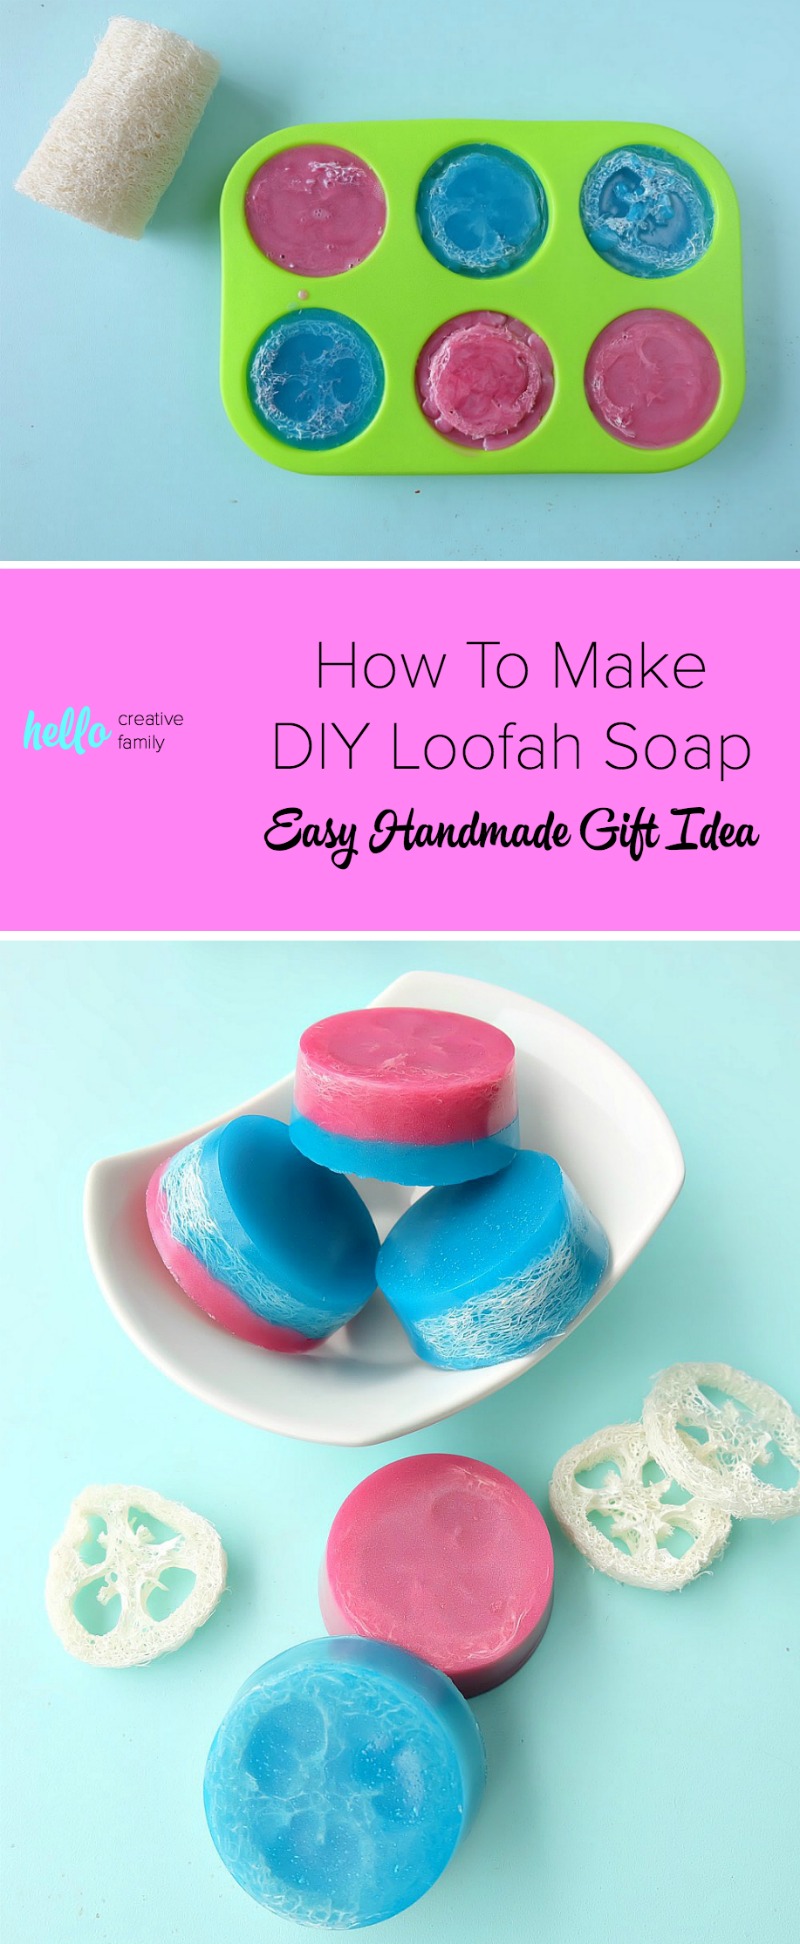 Soap making doesn't have to be complicated! In this post you'll learn how to make DIY Loofah Soap in minutes for an easy handmade gift idea! Combine the exfoliating power of natural loofah with the pampering properties of beautifully scented handmade soap! A fun and easy DIY body product! #naturalbeauty #beautyproducts #DIY #soapmaking